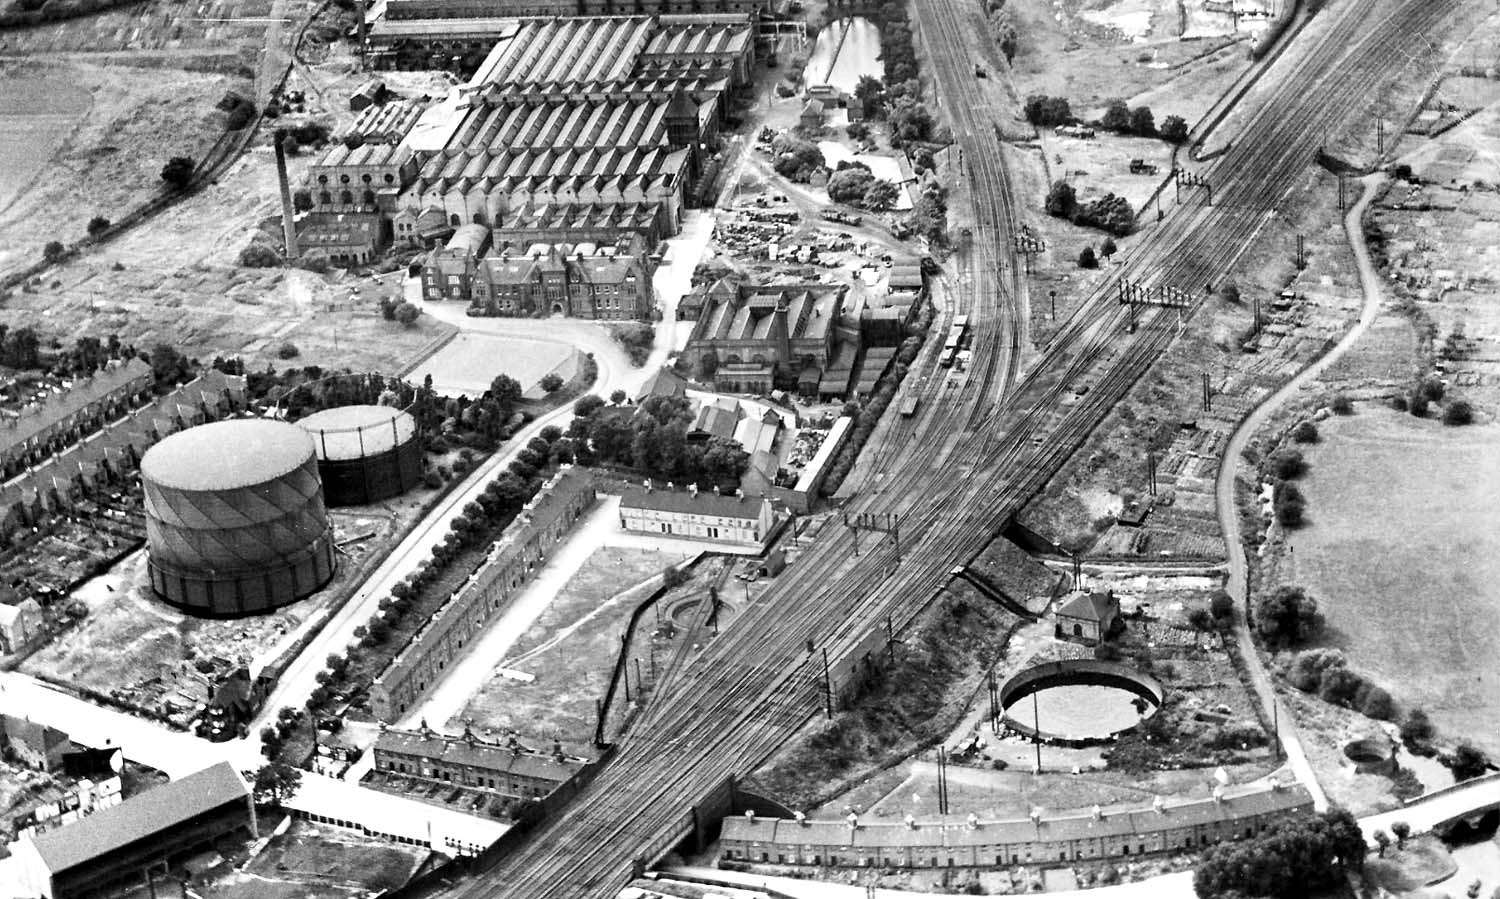 A 1930 panoramic aerial view of Old Station Square and the sidings leading to English Electric's Victoria works